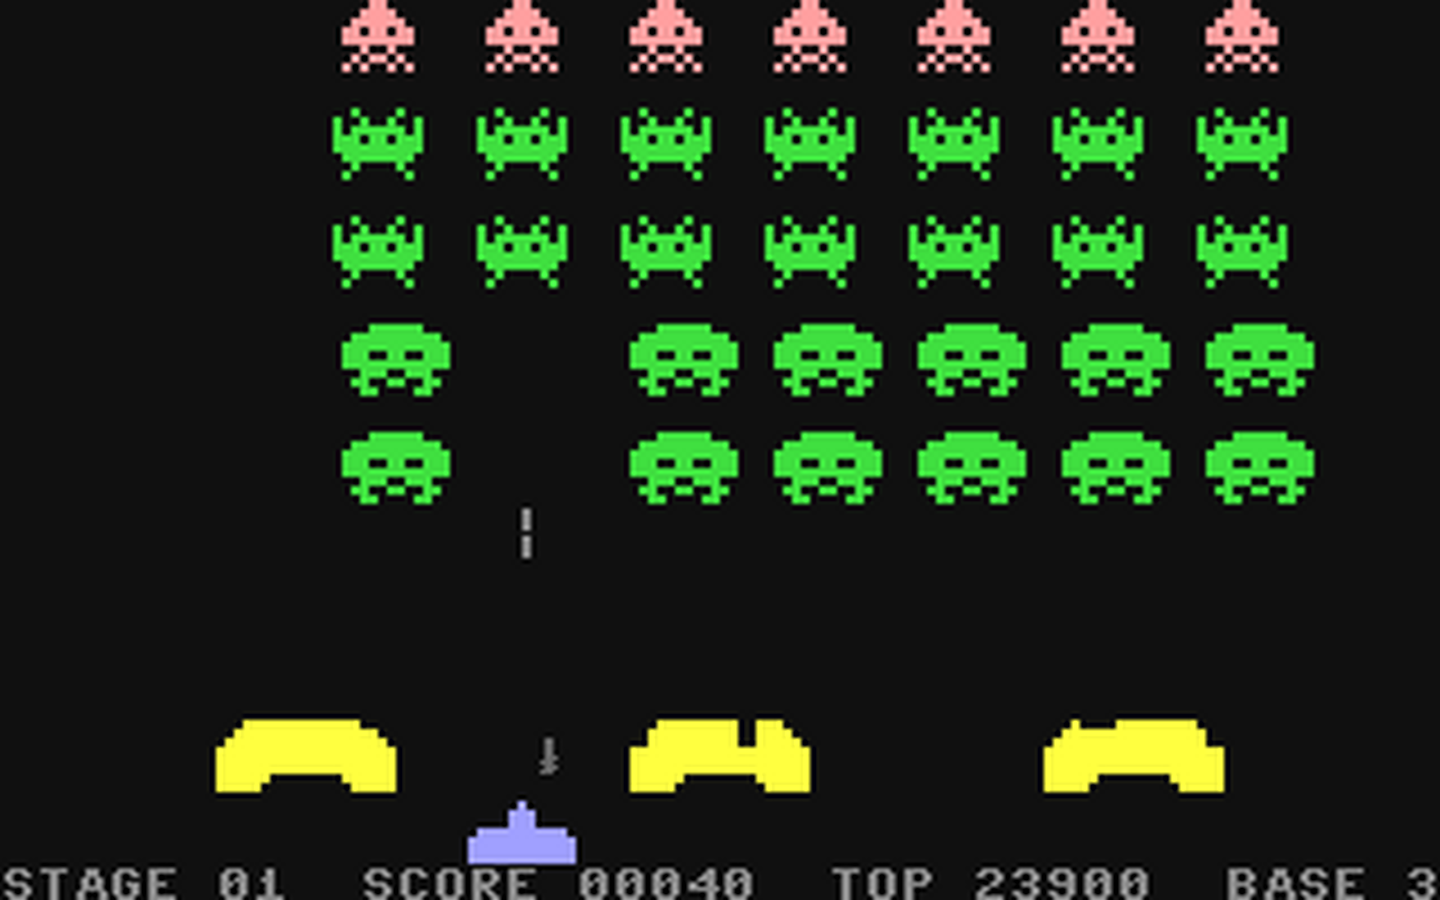 C64 GameBase Space_Invaders (Public_Domain) 2000